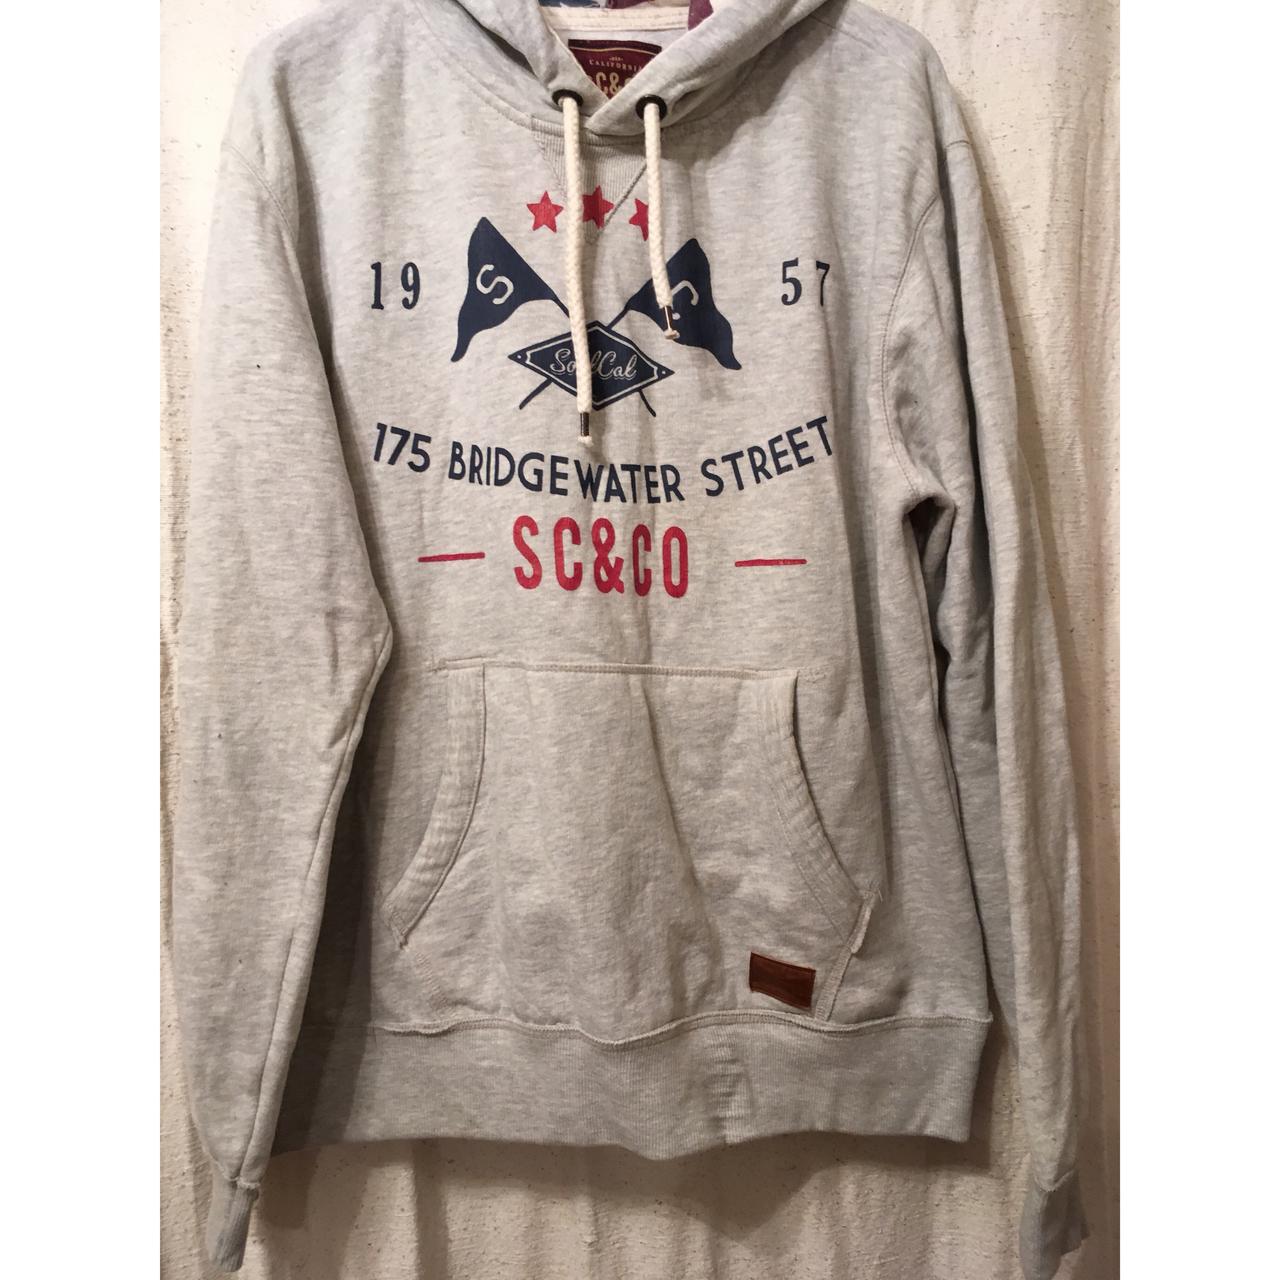 Super soft SC&CO size XL grey hoody with strings.